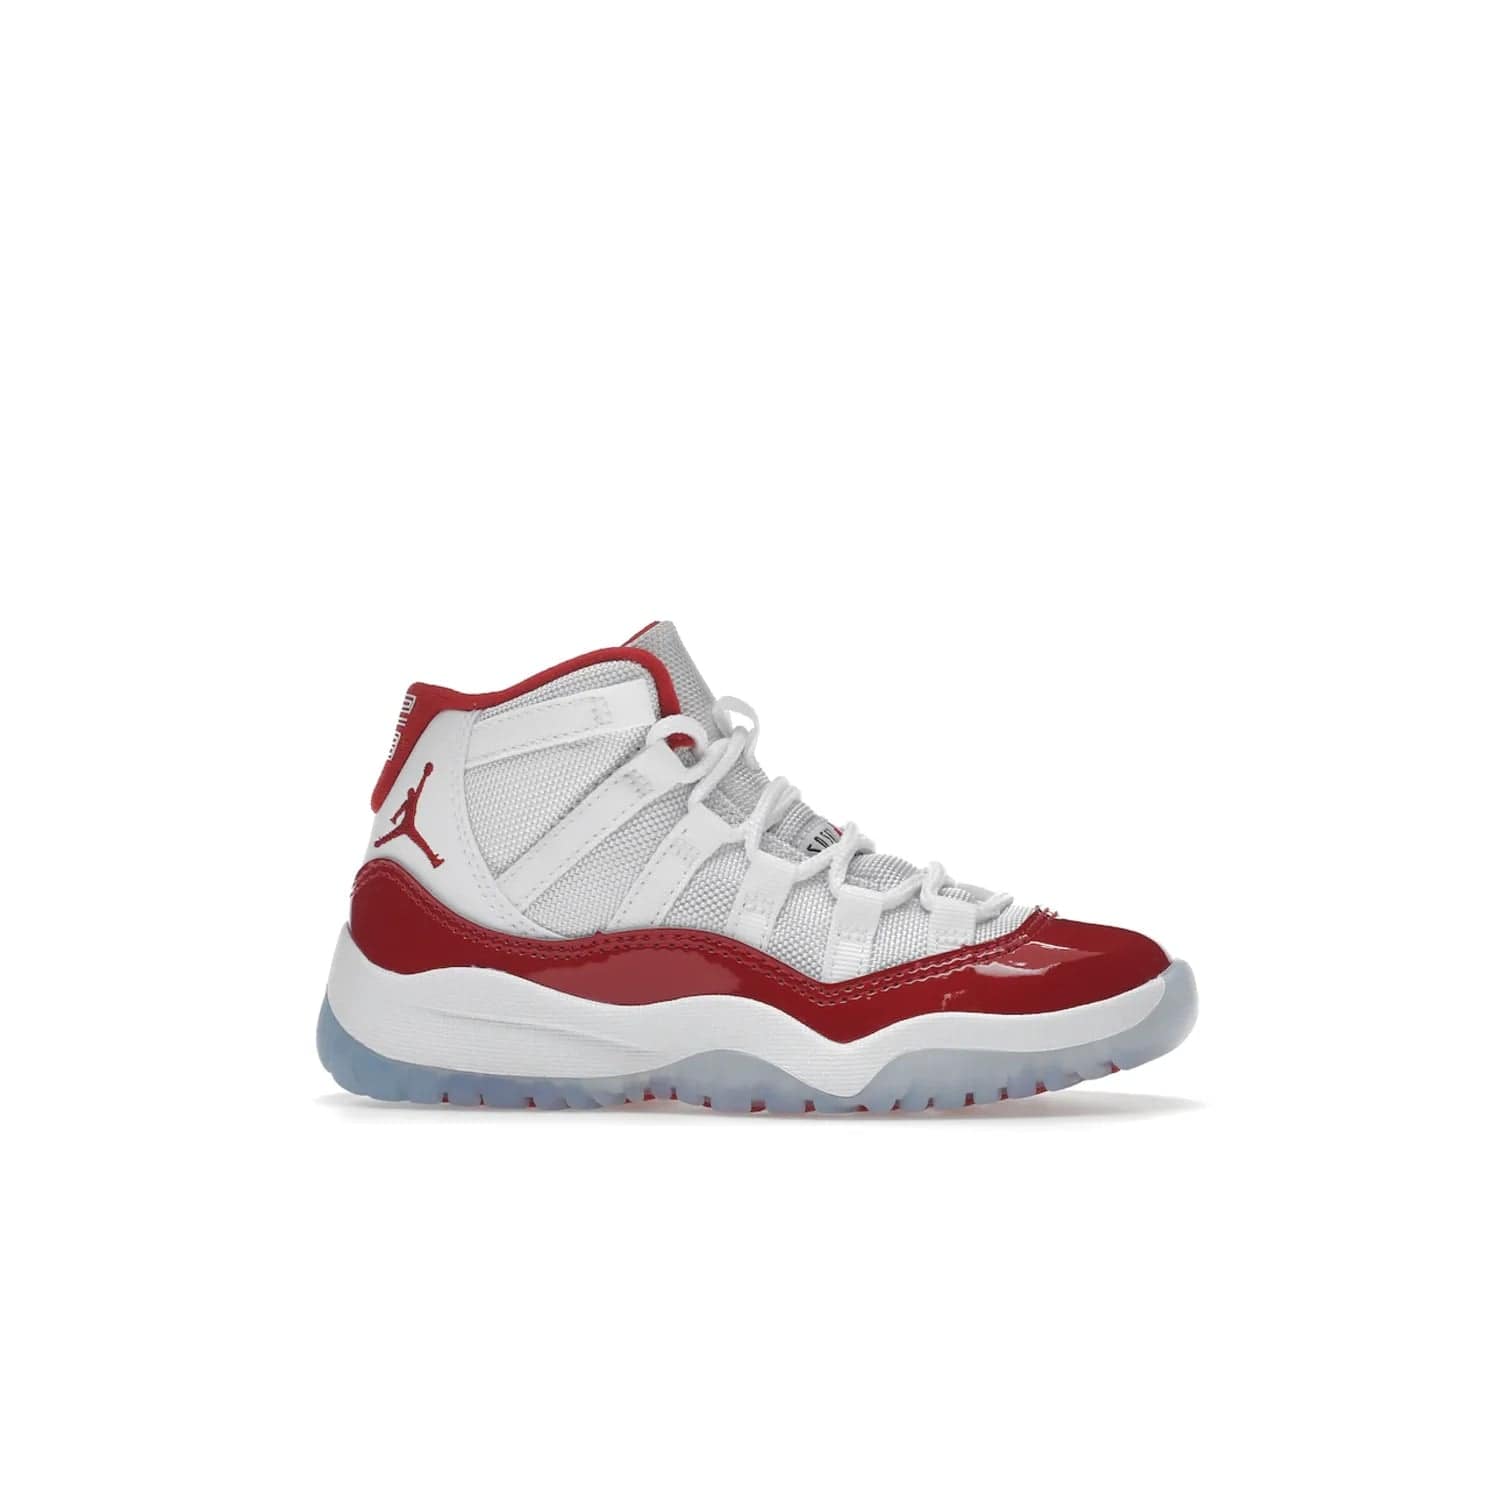 Jordan 11 Retro Cherry (2022) (PS) - Image 2 - Only at www.BallersClubKickz.com - An iconic silhouette with a timeless look, the Air Jordan 11 Retro Cherry 2022 PS features a crisp White, Varsity Red and Black colorway. The upper is made of ballistic mesh, a red patent leather mudguard, '23' branding and white Phylon midsole. Get optimal cushioning and comfort on December 10th, 2022. Don't miss out.